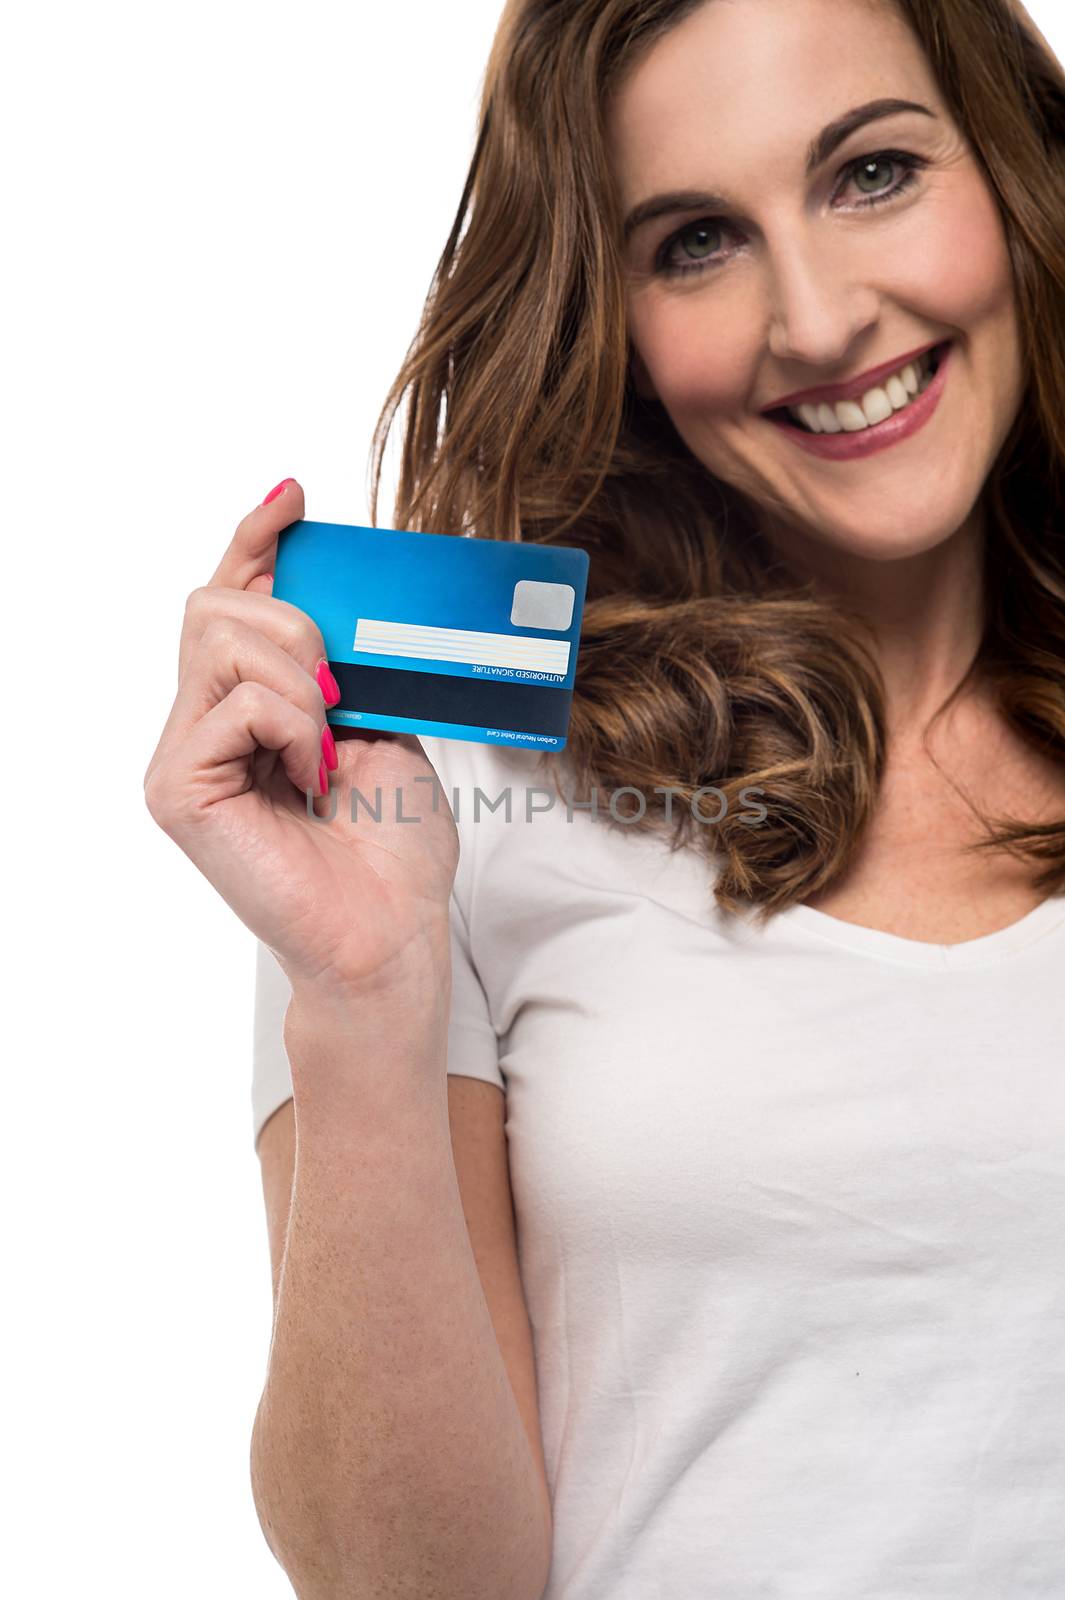 Credit card make your shopping easy. by stockyimages